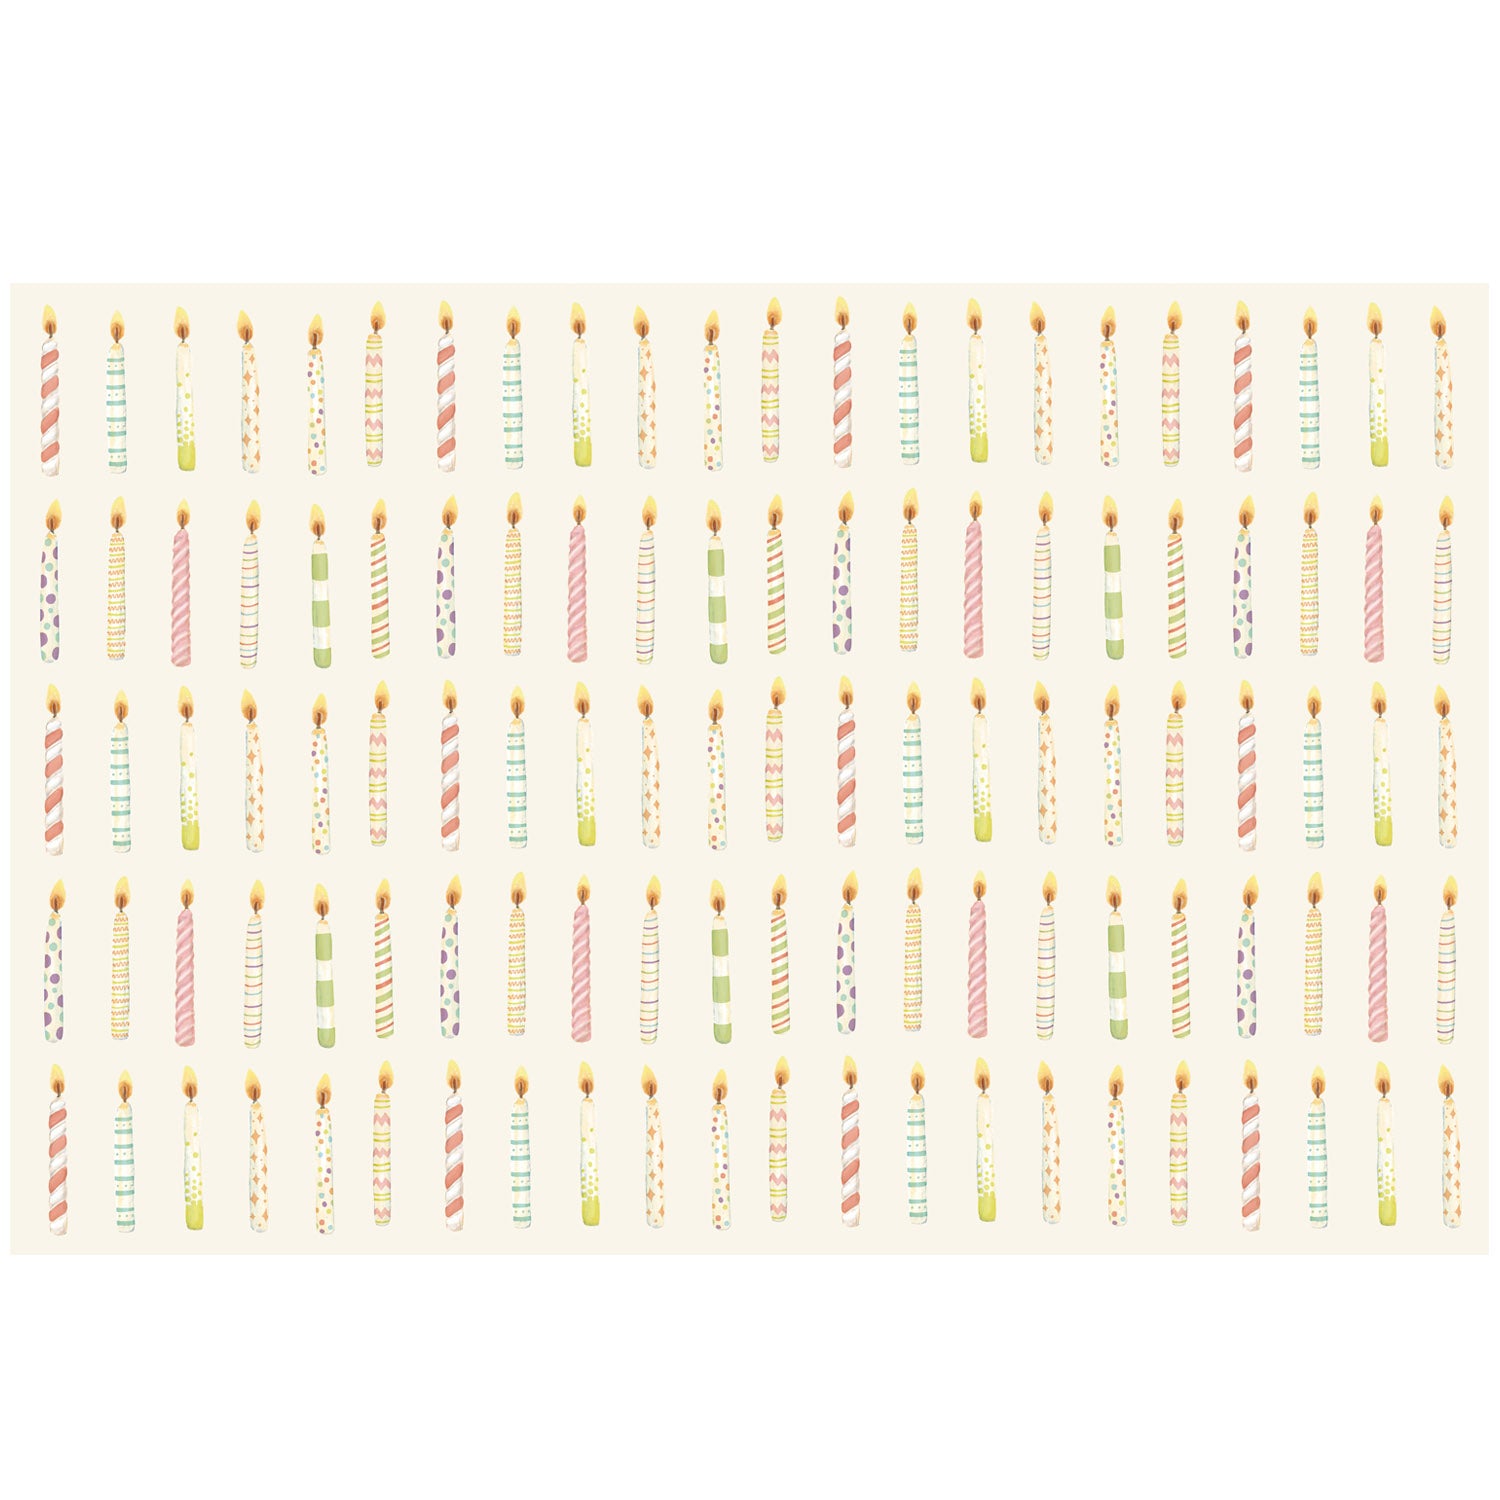 Five rows of illustrated, colorful lit birthday candles across a cream background.